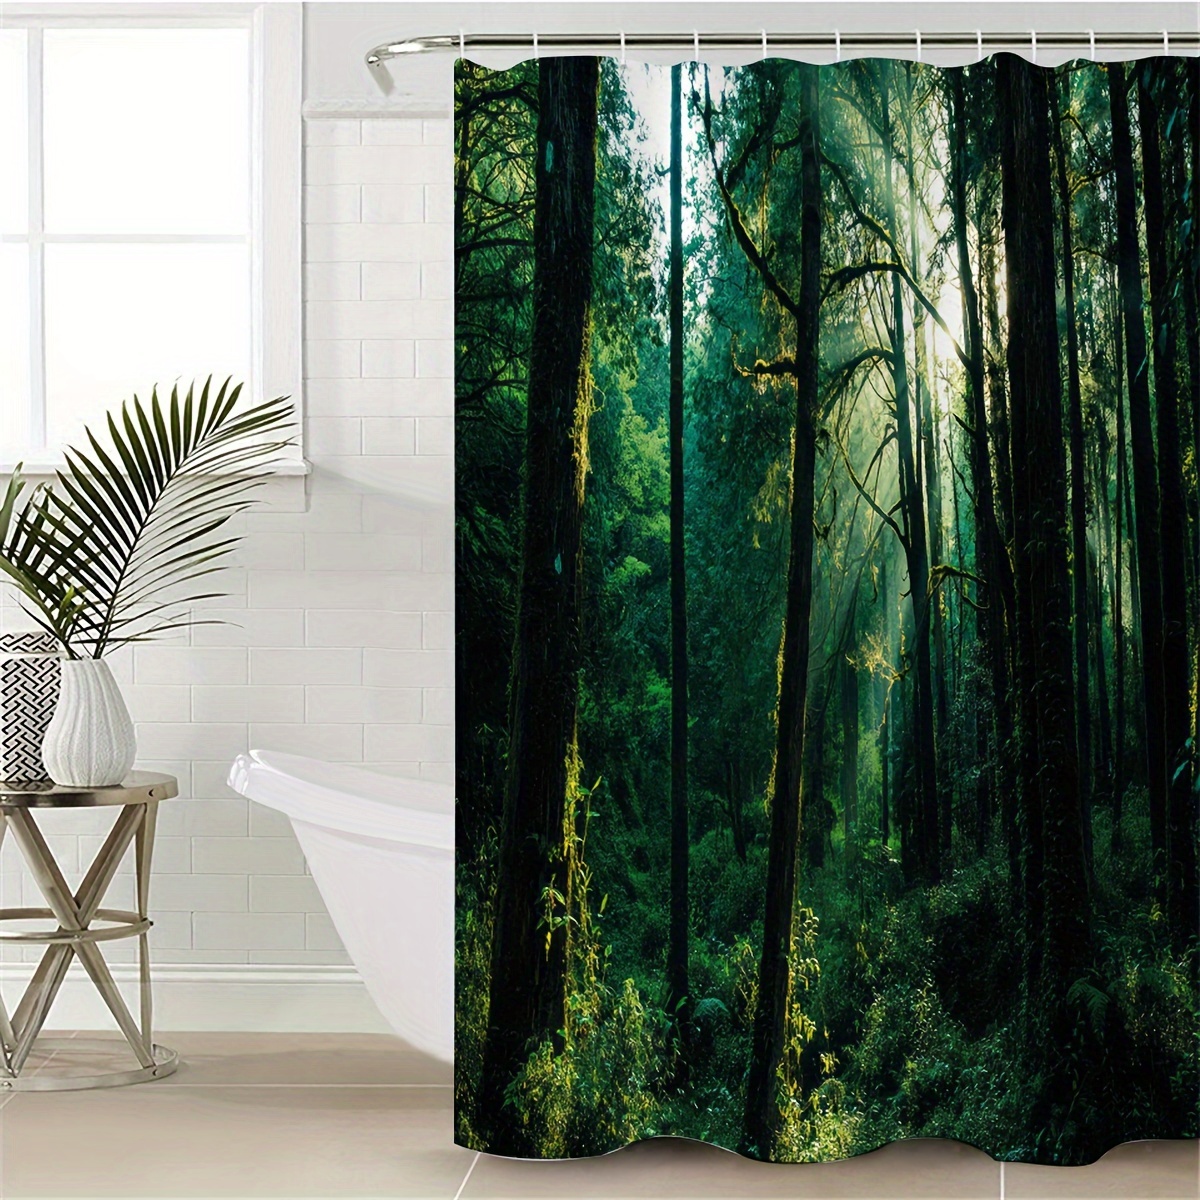 1pc Fantasy Green Tree Shower Curtain Forest Fairy Tales Lanterns